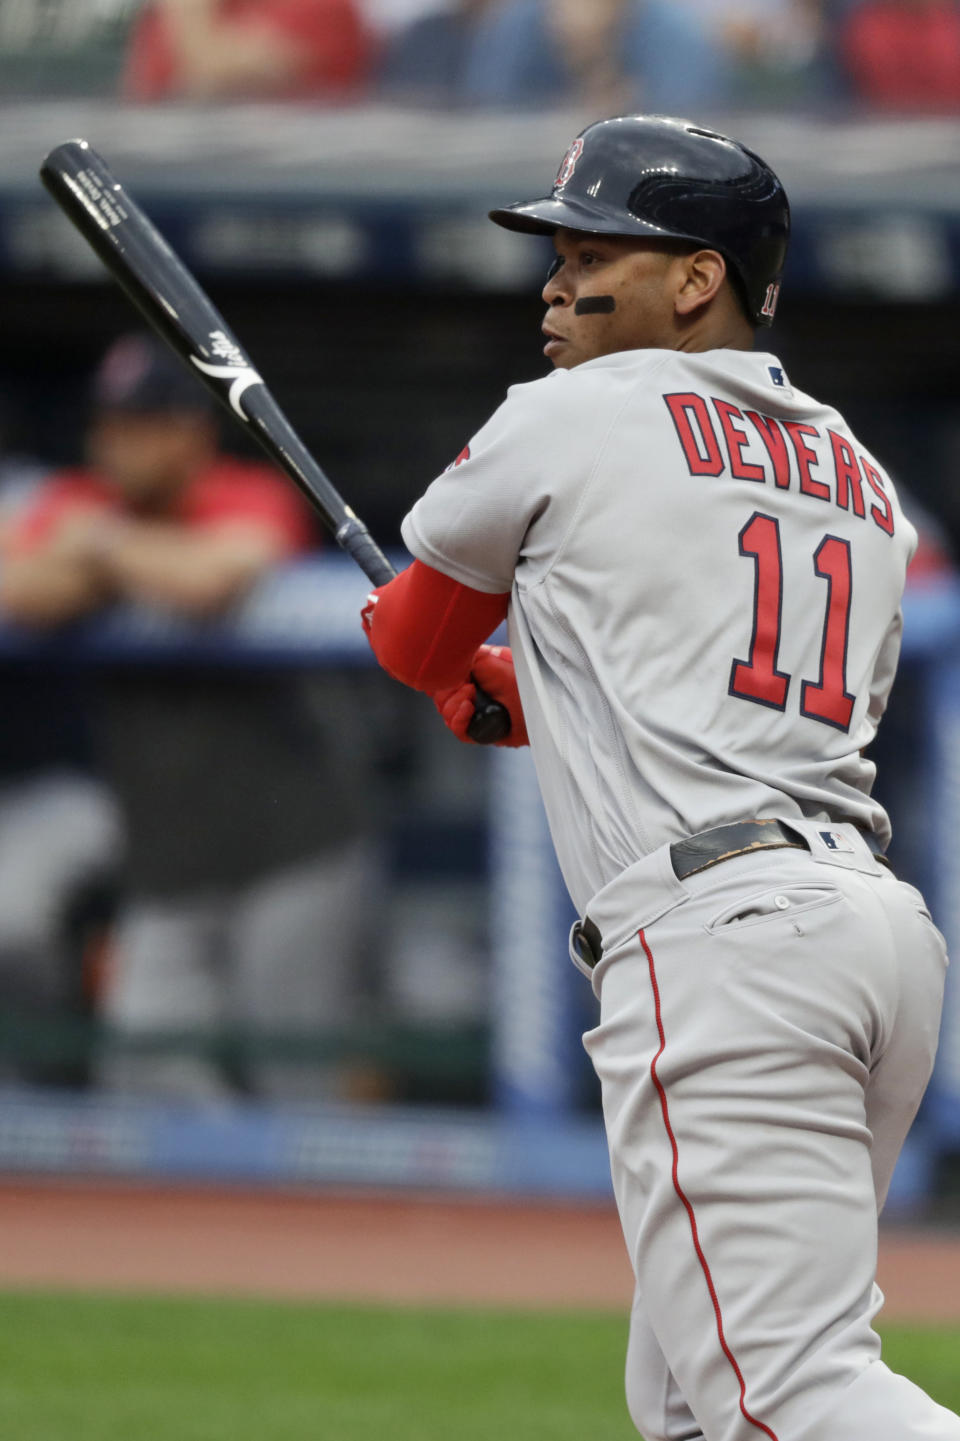 Boston Red Sox's Rafael Devers watches his RBI double during the first inning of the team's baseball game against the Cleveland Indians, Tuesday, Aug. 13, 2019, in Cleveland. (AP Photo/Tony Dejak)